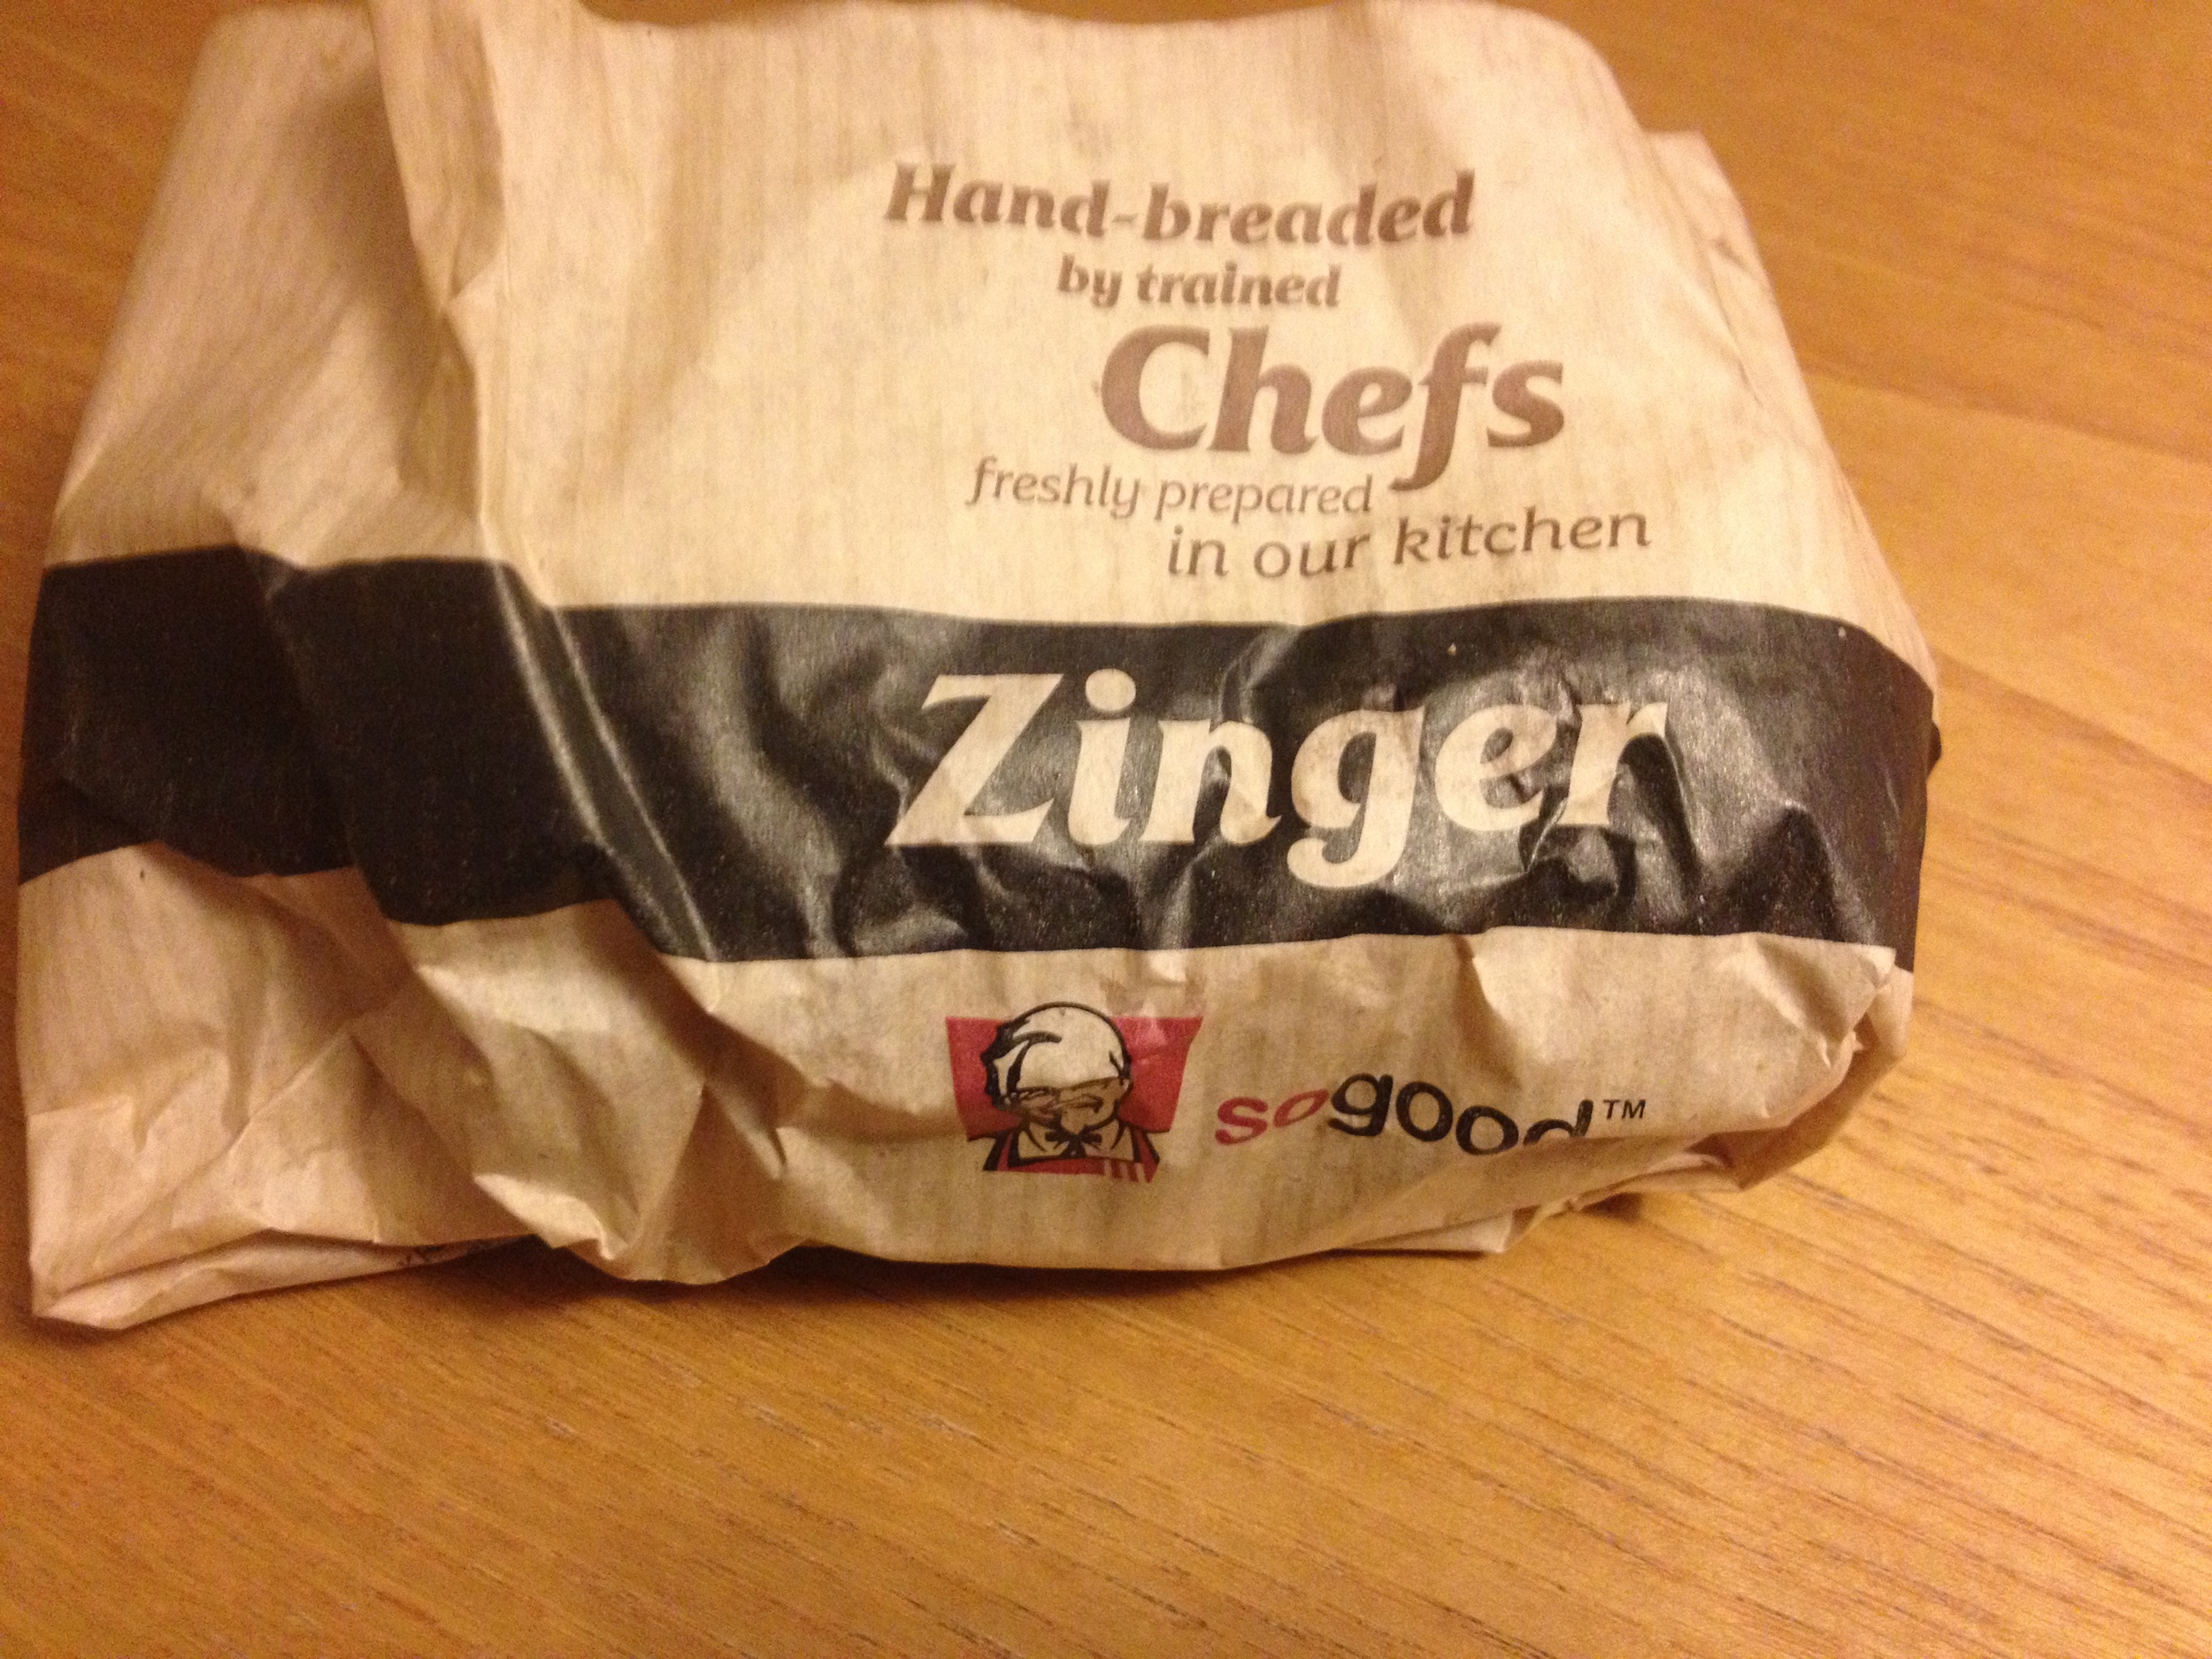  Finally, it's time to try this Zinger Burger.​ 